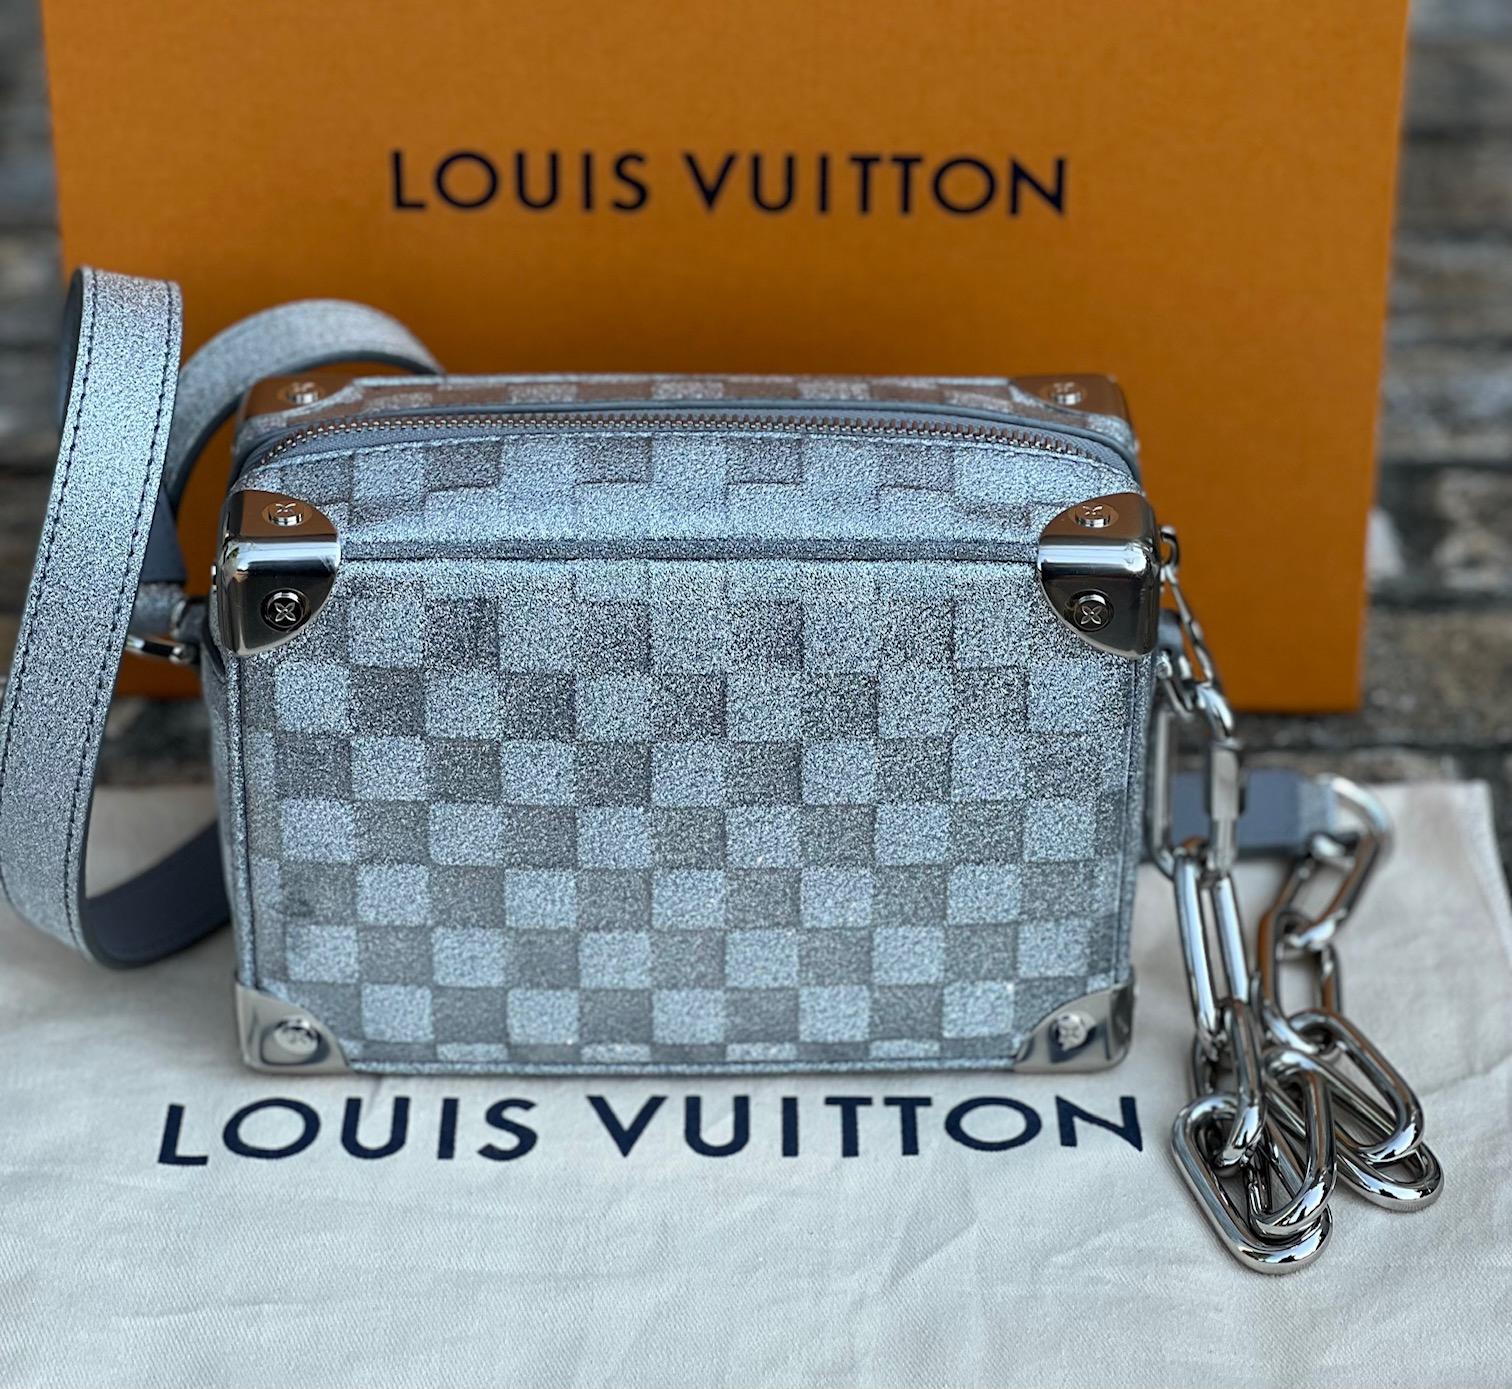 Pre-Owned  100% Authentic
LOUIS VUITTON Soft Trunk Mini Silver
Damier Glitter Crossbody Bag
RATING: A...excellent, near mint, only
slight signs of wear
MATERIAL: coated split vachetta leather
STRAP:  chain, leather and glitter
1 side is removable,